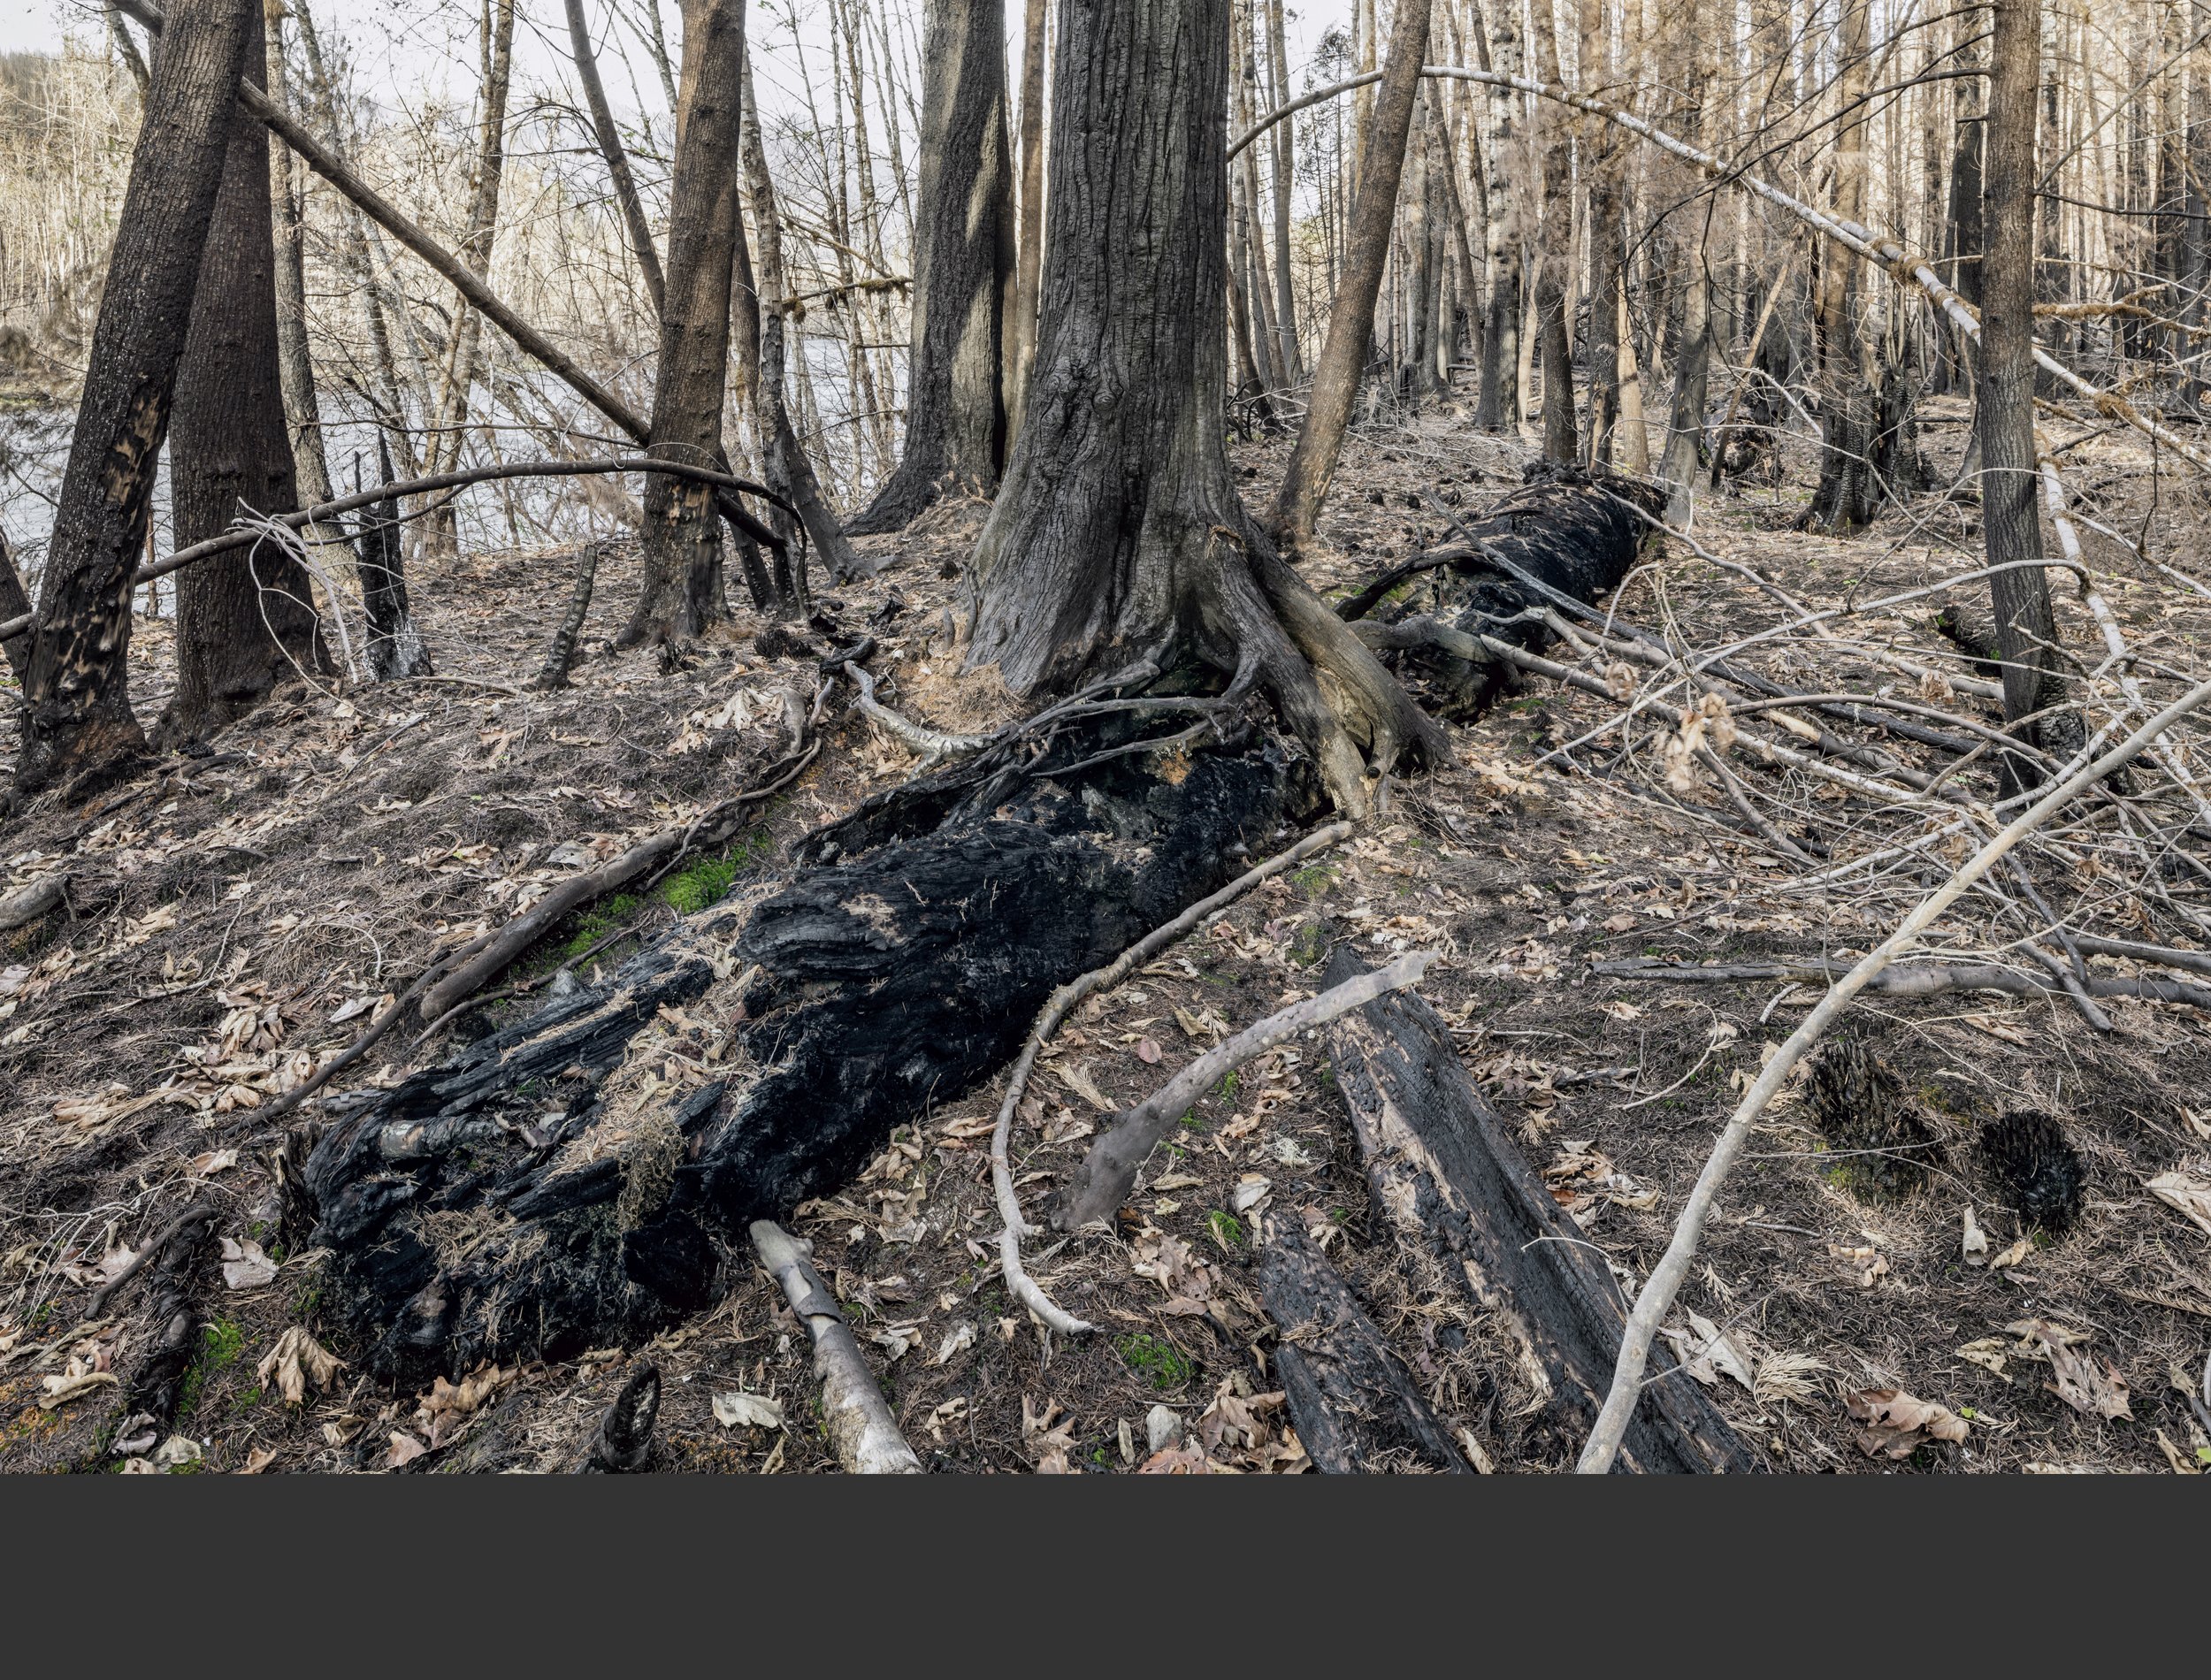 12/20 The groundfire charred the lower 10-20 feet of tree trunks and removed the forest understory, creating a skeletal forest. Unburned leaves and needles fell after the fire.